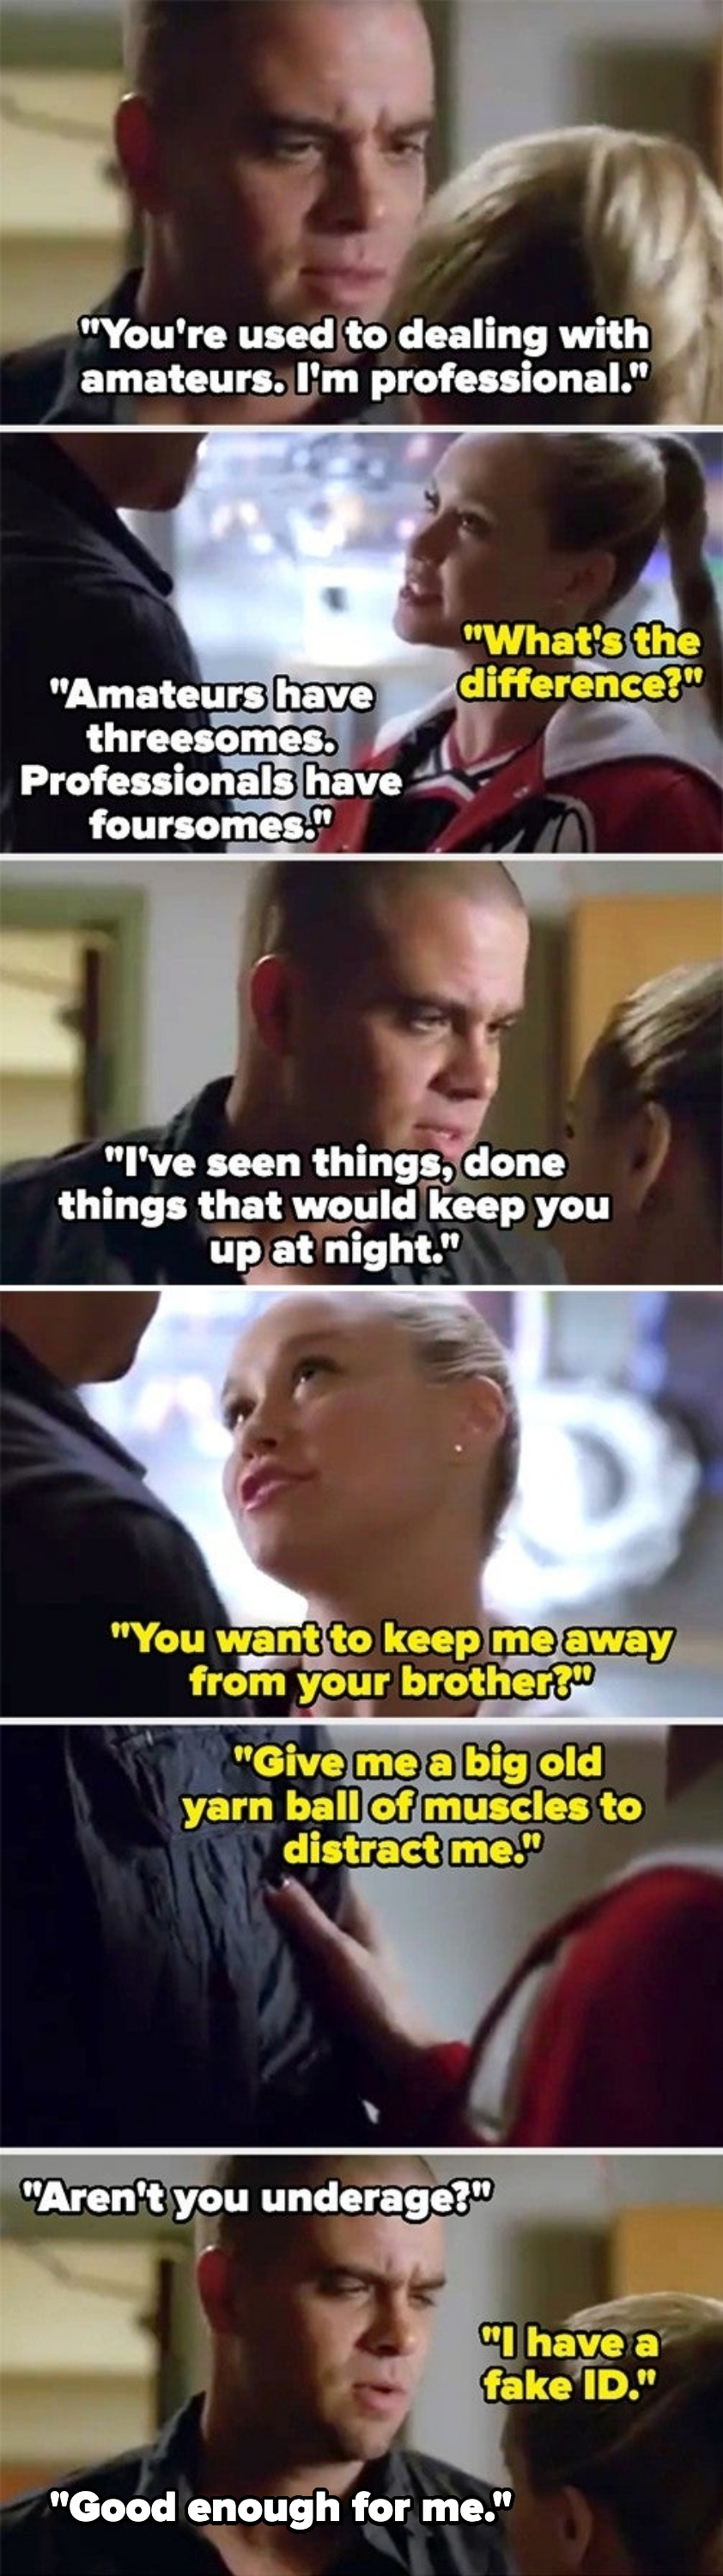 Screenshots from &quot;Glee&quot;